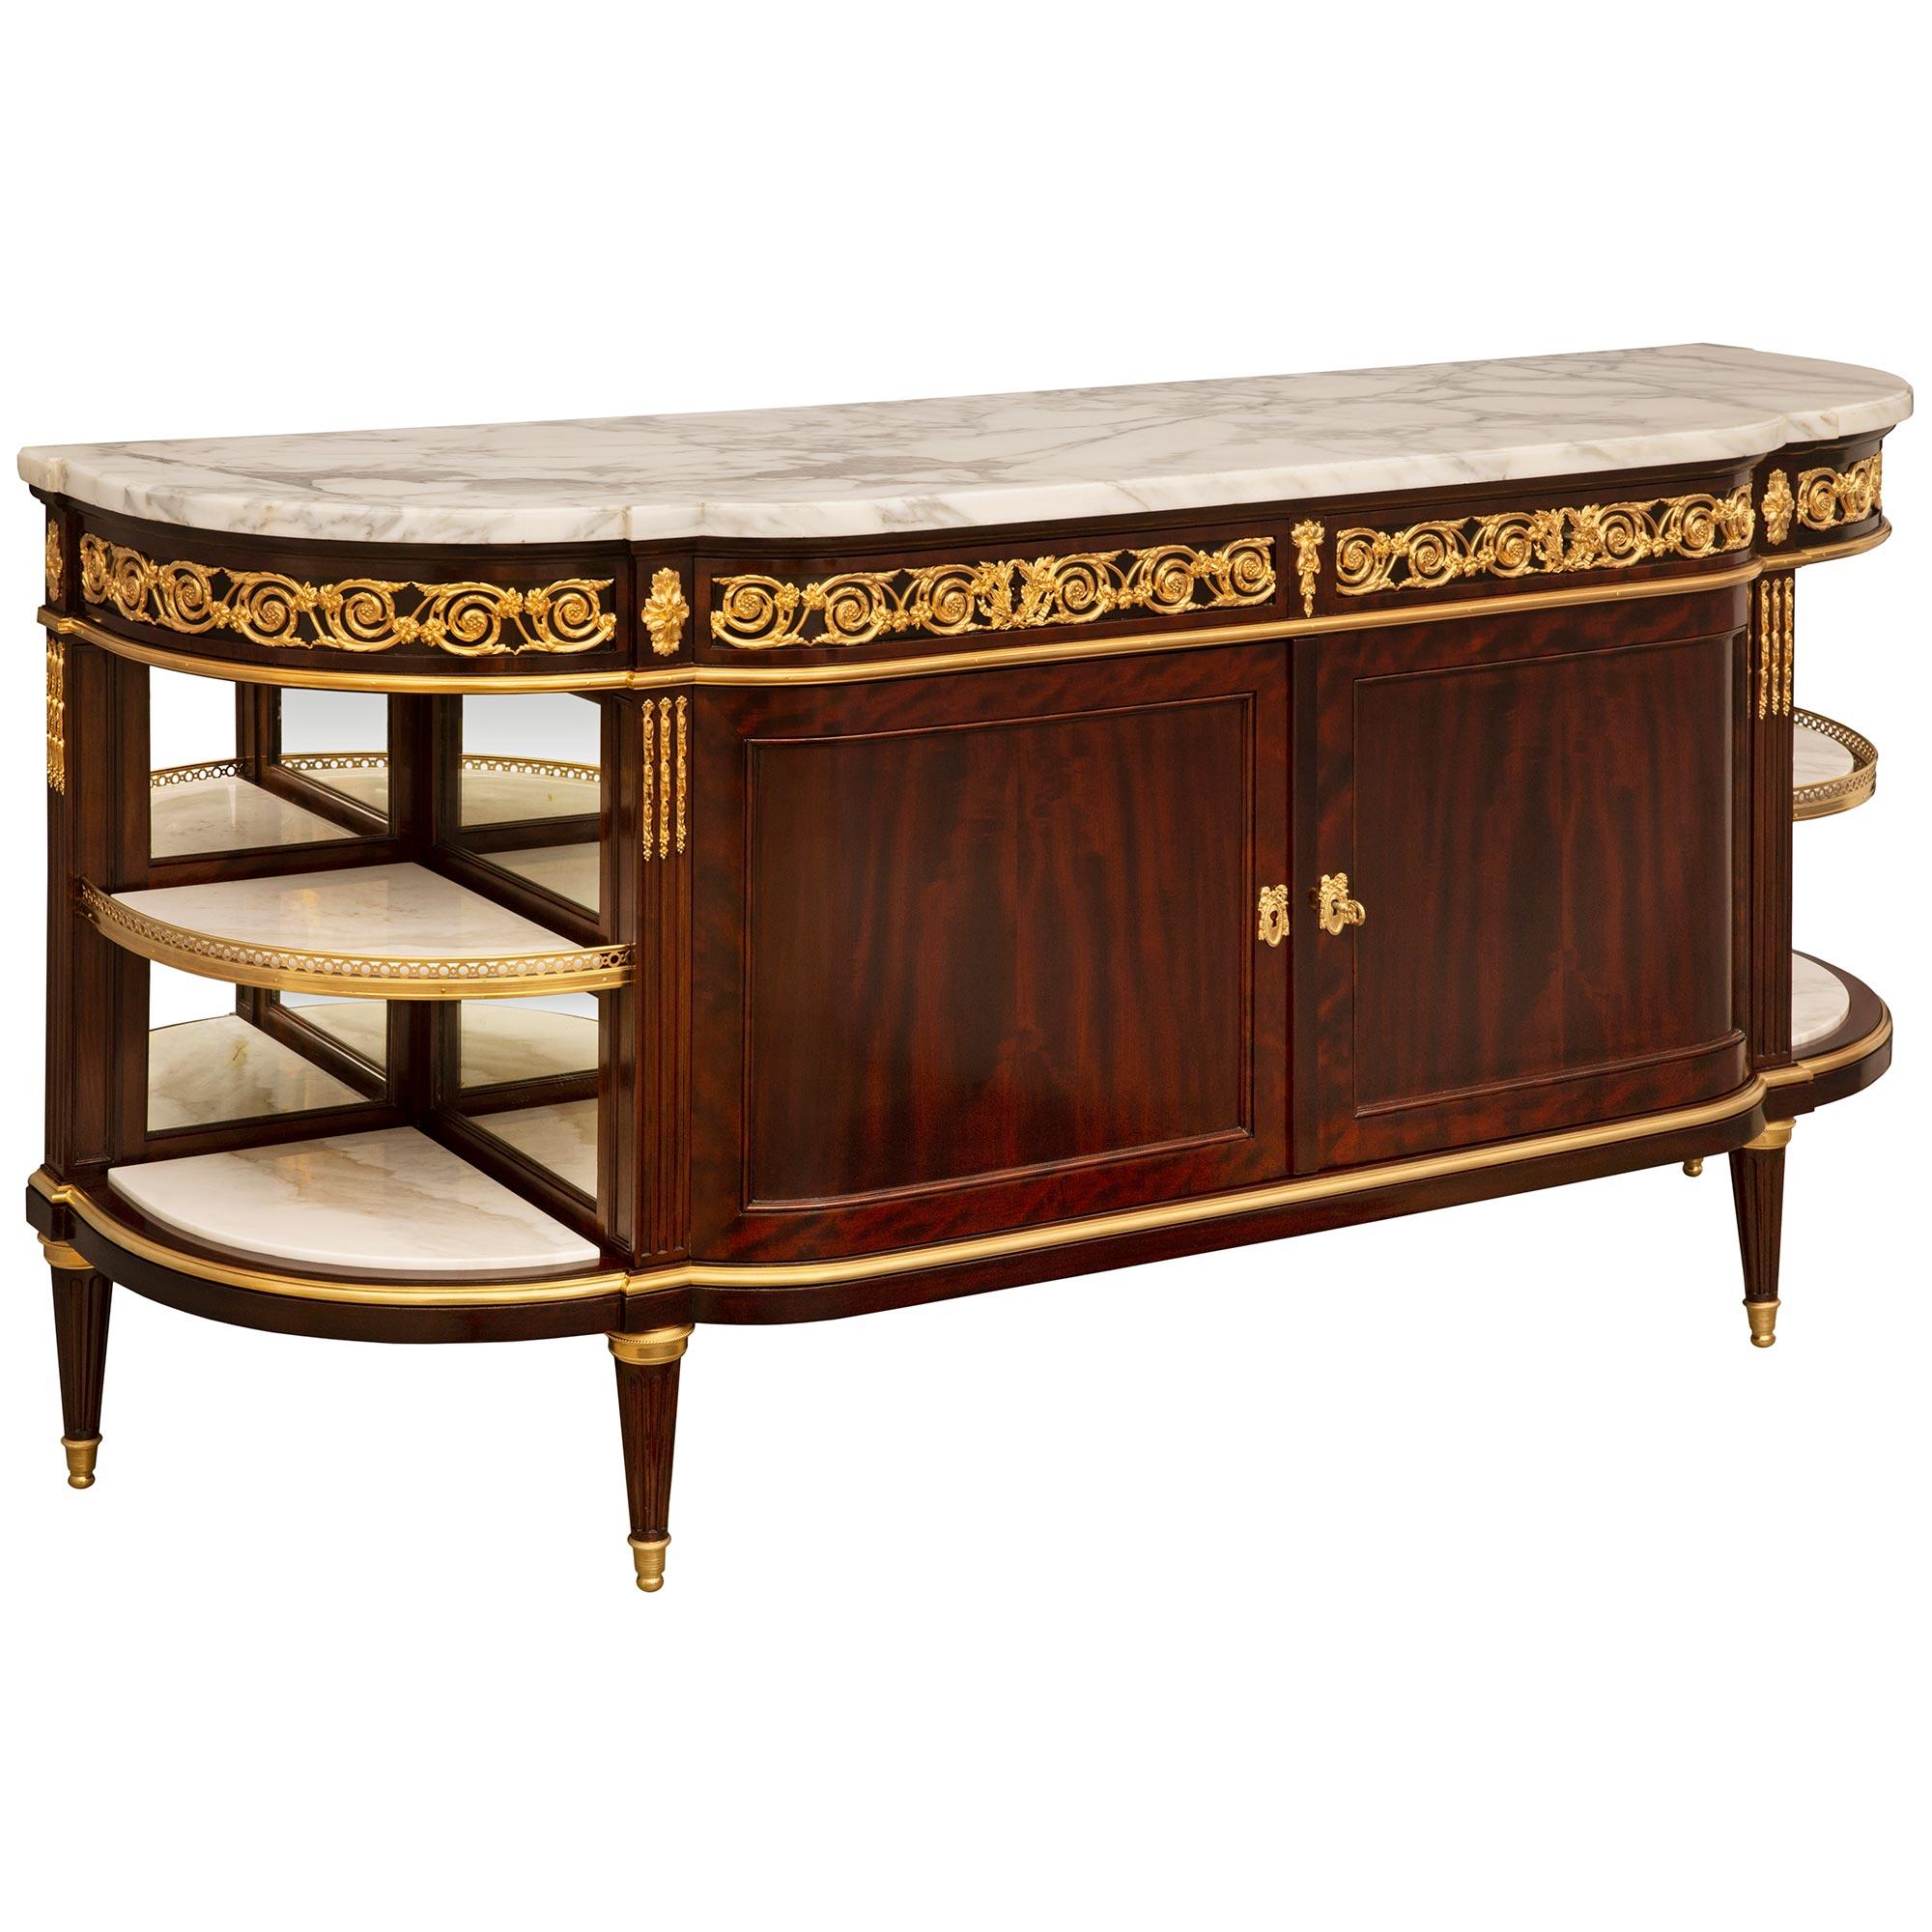 A French 19th century Louis XVI st. Belle Époque buffet signed by Paul Somani In Good Condition For Sale In West Palm Beach, FL